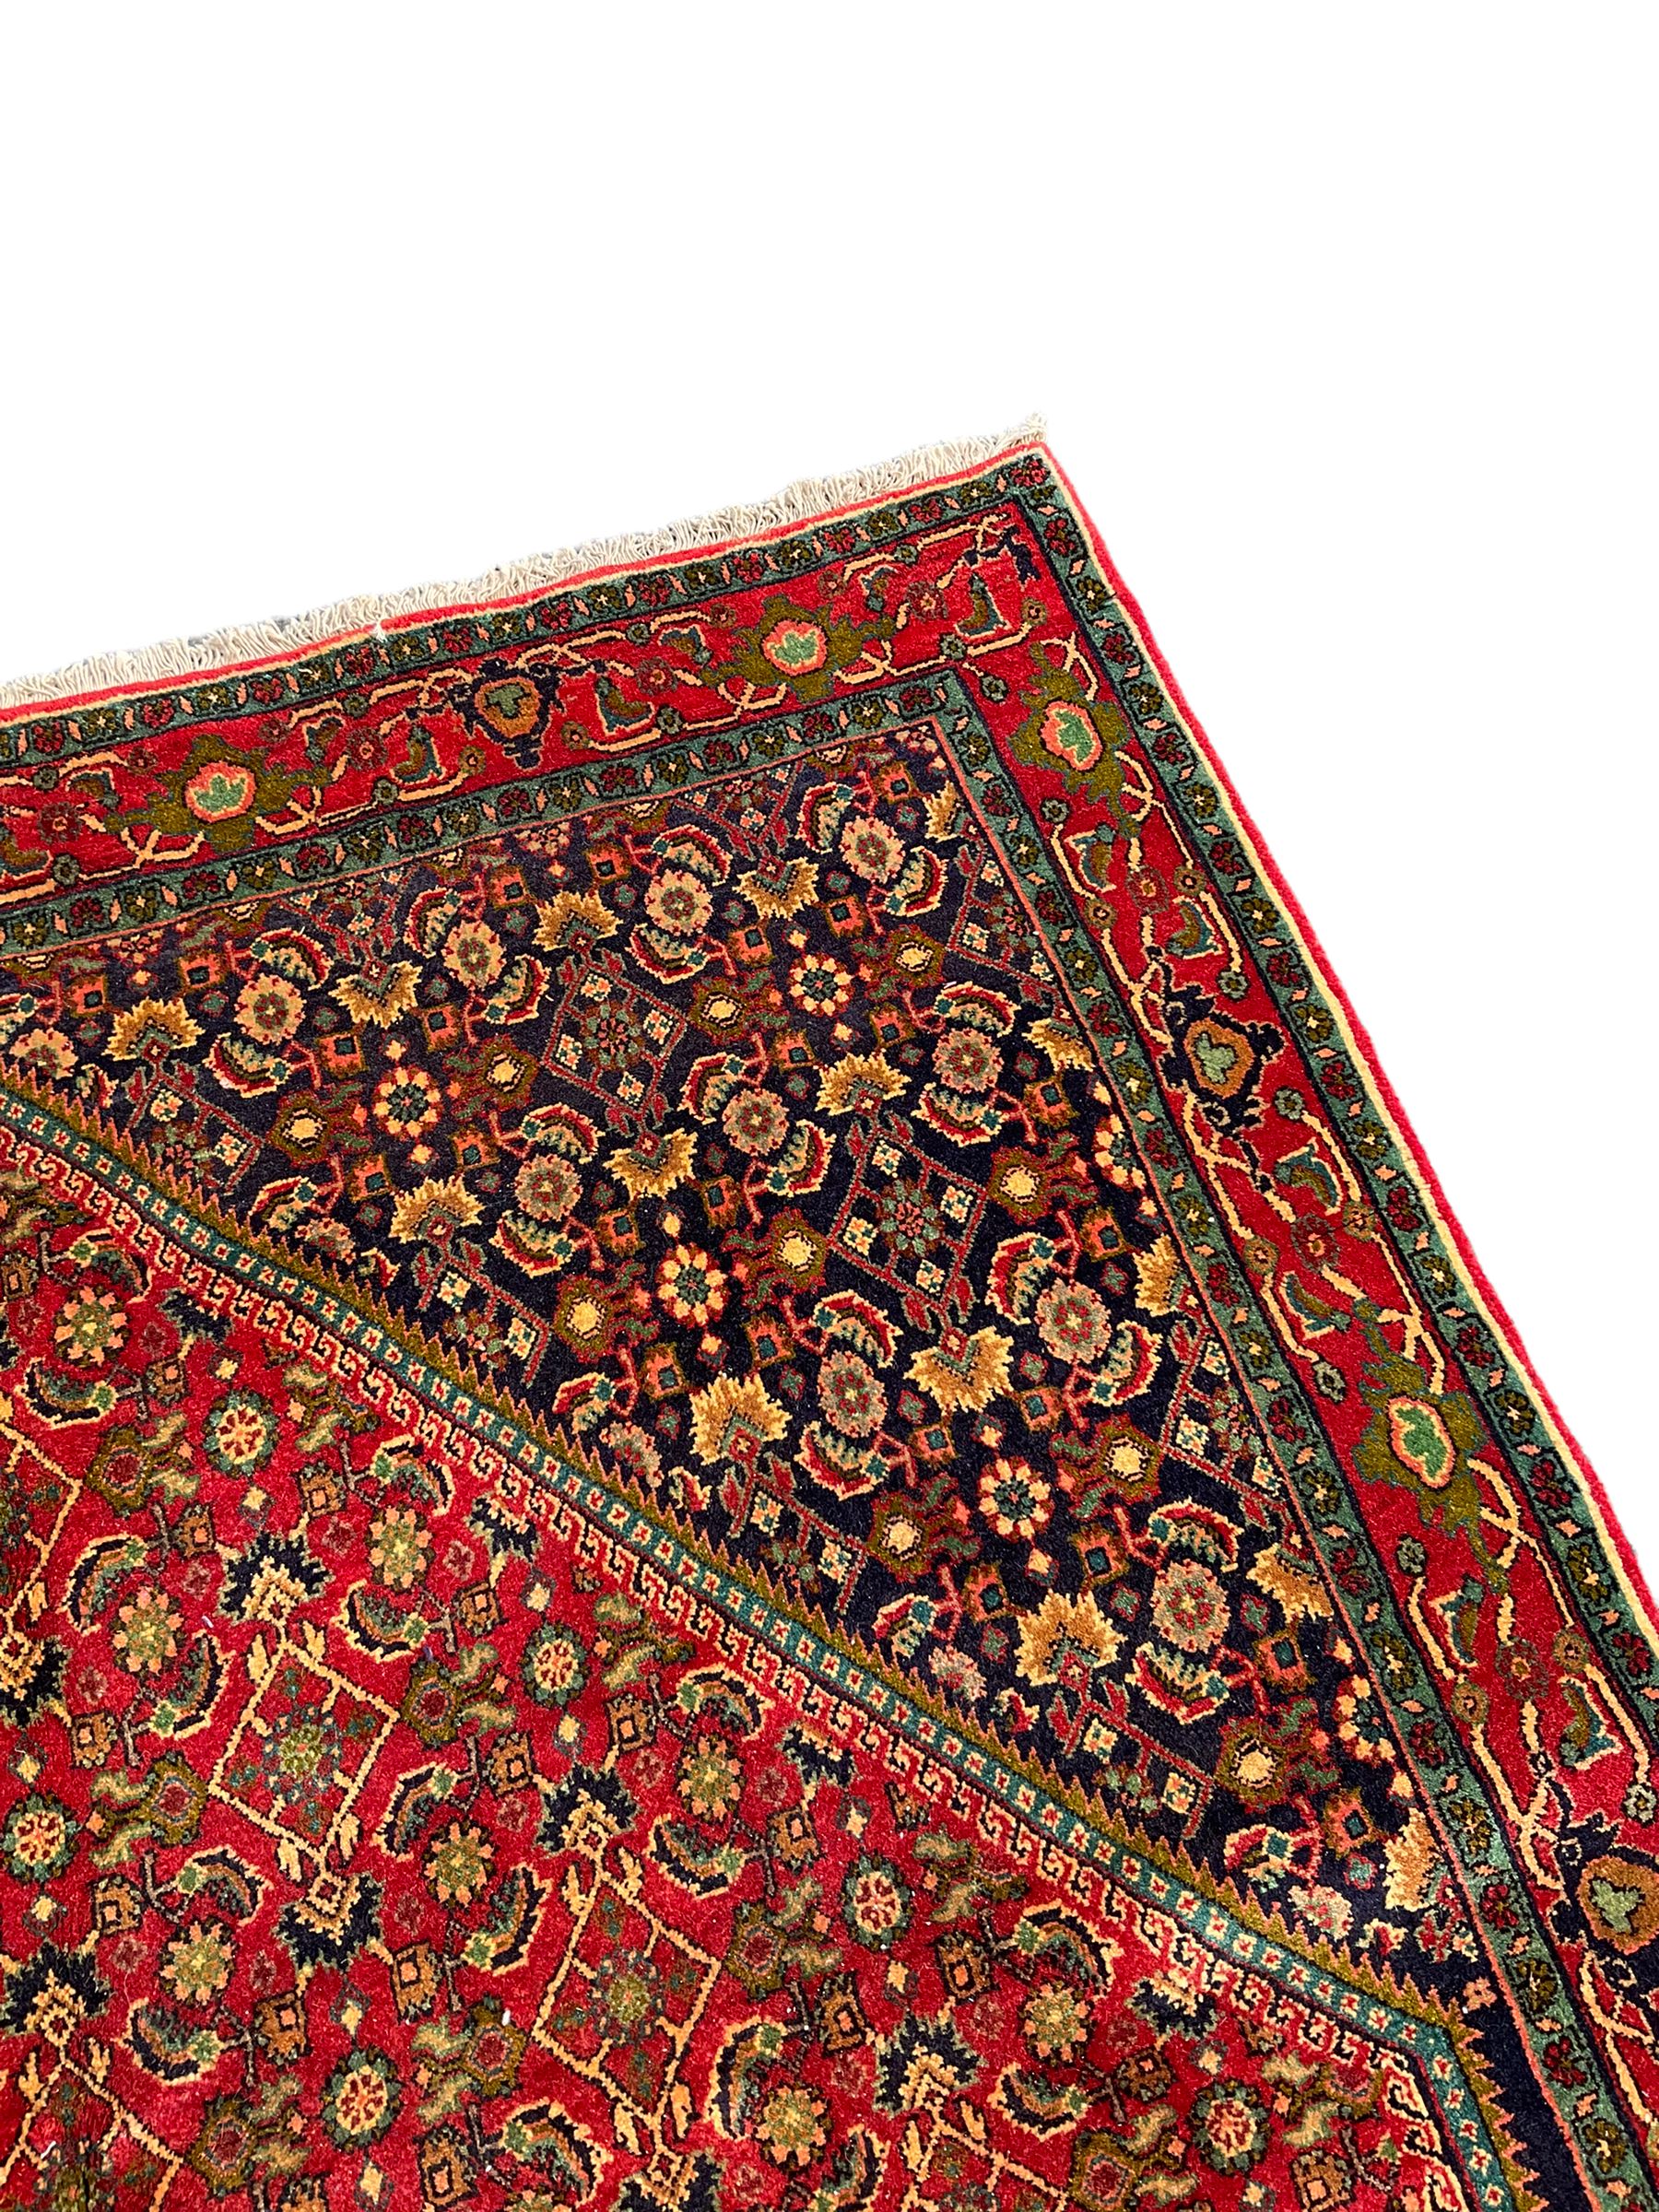 Persian Bijar red and blue ground rug - Image 6 of 6